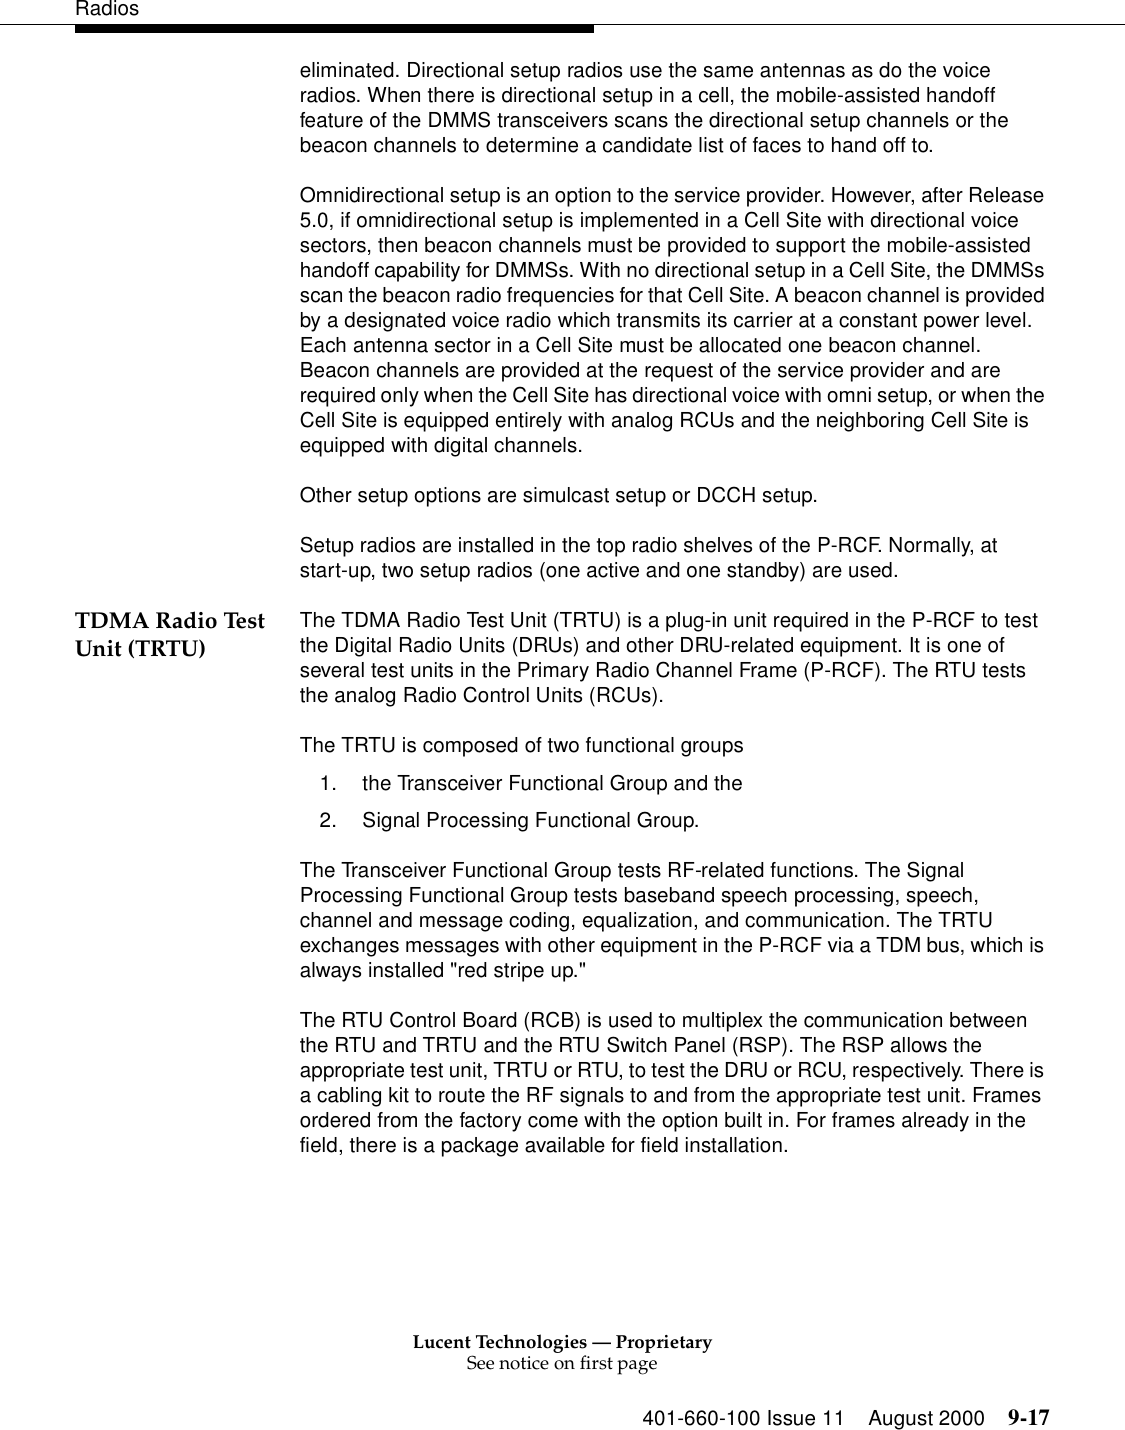 Lucent Technologies — ProprietarySee notice on first page401-660-100 Issue 11 August 2000 9-17Radioseliminated. Directional setup radios use the same antennas as do the voice radios. When there is directional setup in a cell, the mobile-assisted handoff feature of the DMMS transceivers scans the directional setup channels or the beacon channels to determine a candidate list of faces to hand off to. Omnidirectional setup is an option to the service provider. However, after Release 5.0, if omnidirectional setup is implemented in a Cell Site with directional voice sectors, then beacon channels must be provided to support the mobile-assisted handoff capability for DMMSs. With no directional setup in a Cell Site, the DMMSs scan the beacon radio frequencies for that Cell Site. A beacon channel is provided by a designated voice radio which transmits its carrier at a constant power level. Each antenna sector in a Cell Site must be allocated one beacon channel. Beacon channels are provided at the request of the service provider and are required only when the Cell Site has directional voice with omni setup, or when the Cell Site is equipped entirely with analog RCUs and the neighboring Cell Site is equipped with digital channels. Other setup options are simulcast setup or DCCH setup. Setup radios are installed in the top radio shelves of the P-RCF. Normally, at start-up, two setup radios (one active and one standby) are used. TDMA Radio Test Unit (TRTU) The TDMA Radio Test Unit (TRTU) is a plug-in unit required in the P-RCF to test the Digital Radio Units (DRUs) and other DRU-related equipment. It is one of several test units in the Primary Radio Channel Frame (P-RCF). The RTU tests the analog Radio Control Units (RCUs). The TRTU is composed of two functional groups 1. the Transceiver Functional Group and the 2. Signal Processing Functional Group. The Transceiver Functional Group tests RF-related functions. The Signal Processing Functional Group tests baseband speech processing, speech, channel and message coding, equalization, and communication. The TRTU exchanges messages with other equipment in the P-RCF via a TDM bus, which is always installed &quot;red stripe up.&quot;The RTU Control Board (RCB) is used to multiplex the communication between the RTU and TRTU and the RTU Switch Panel (RSP). The RSP allows the appropriate test unit, TRTU or RTU, to test the DRU or RCU, respectively. There is a cabling kit to route the RF signals to and from the appropriate test unit. Frames ordered from the factory come with the option built in. For frames already in the field, there is a package available for field installation. 